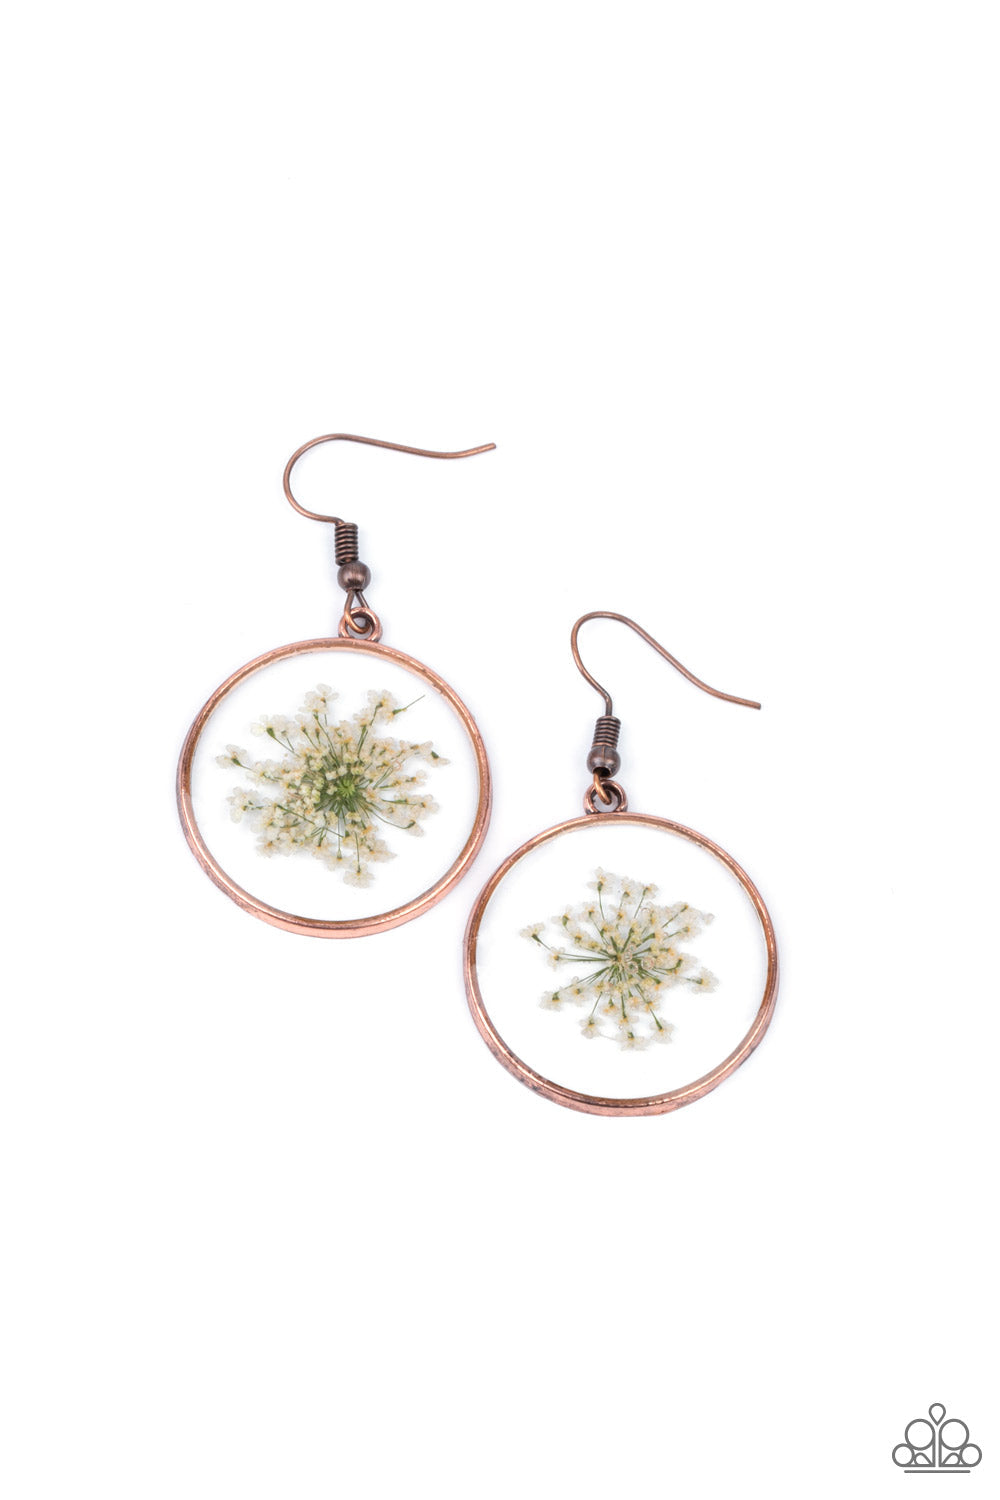 ​Happily Ever Eden - Copper - White Flower Earrings - Paparazzi Accessories - Dainty white firework flowers are encased inside a glassy casing bordered in an antiqued copper trim, creating a whimsical frame. Earring attaches to a standard fishhook fitting. Sold as one pair of earrings.